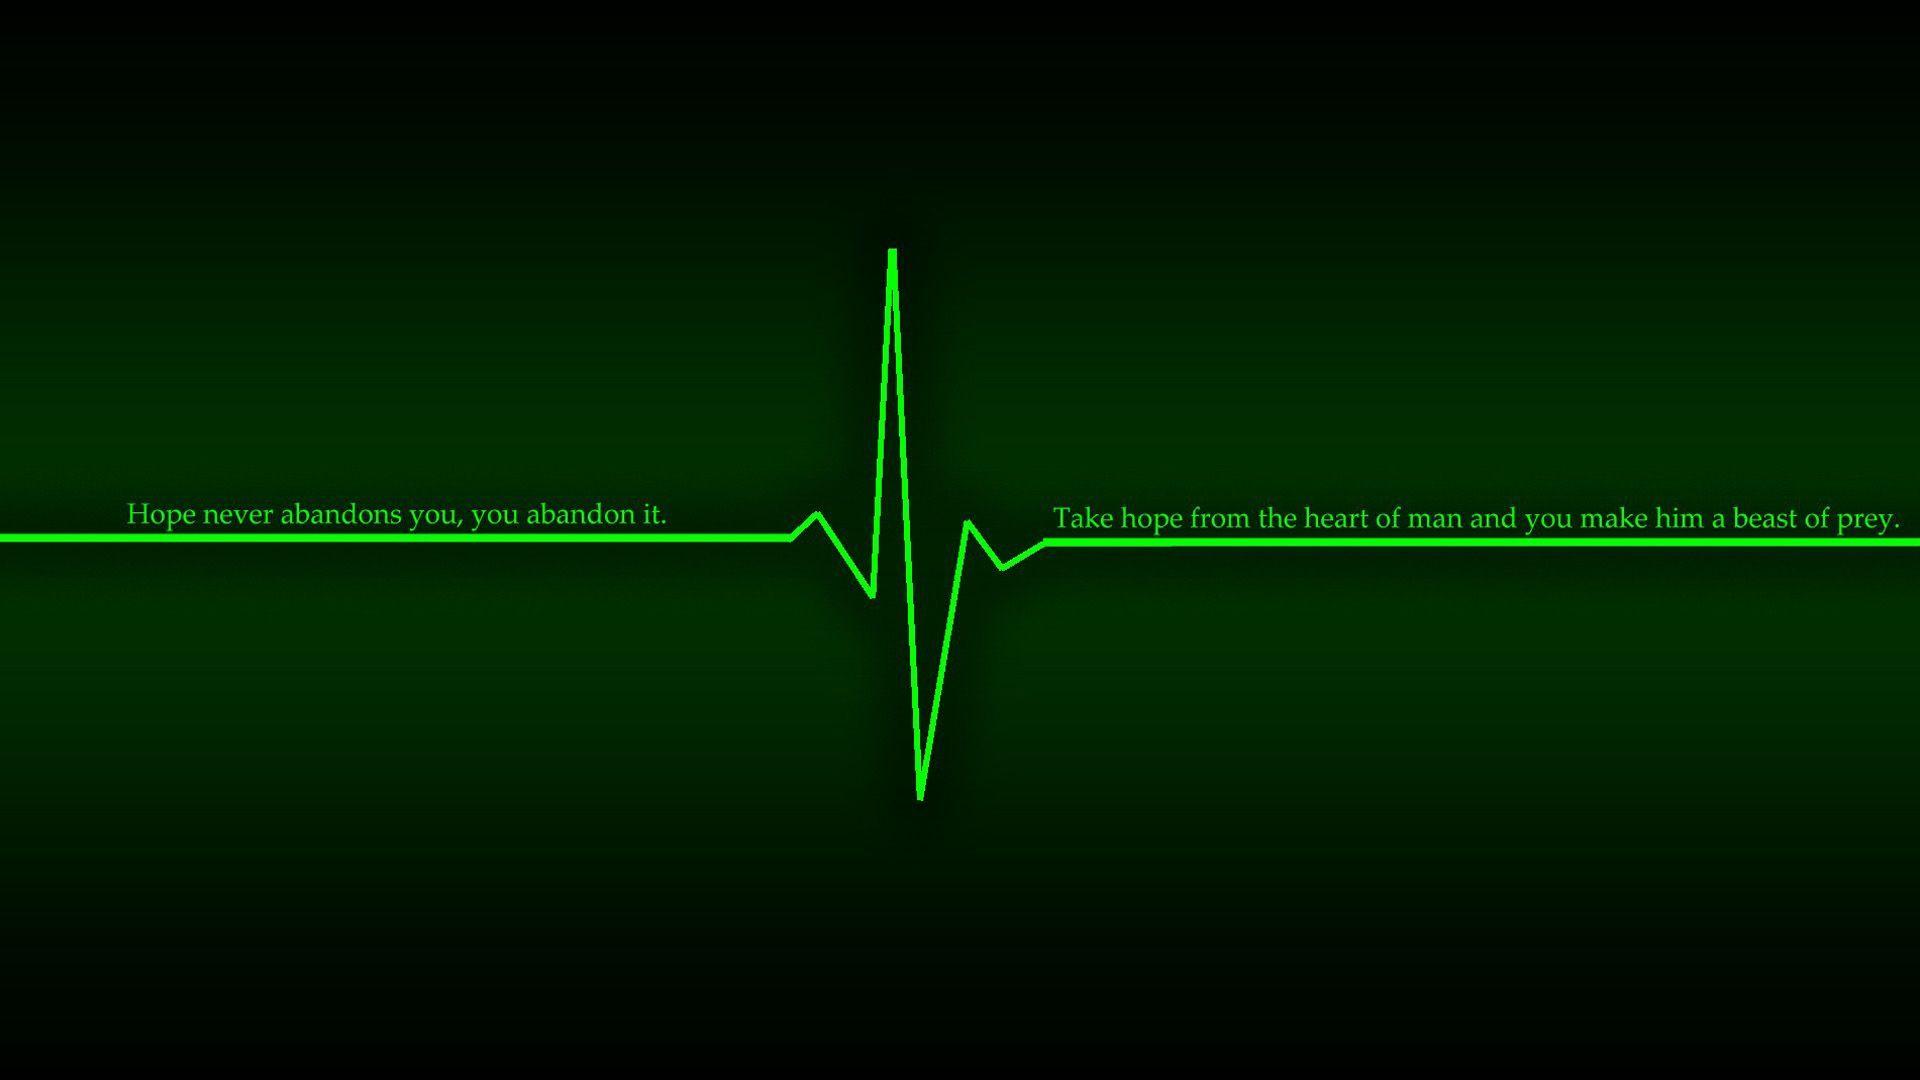 ECG Wallpaper, Green Background, Picture and image. Android